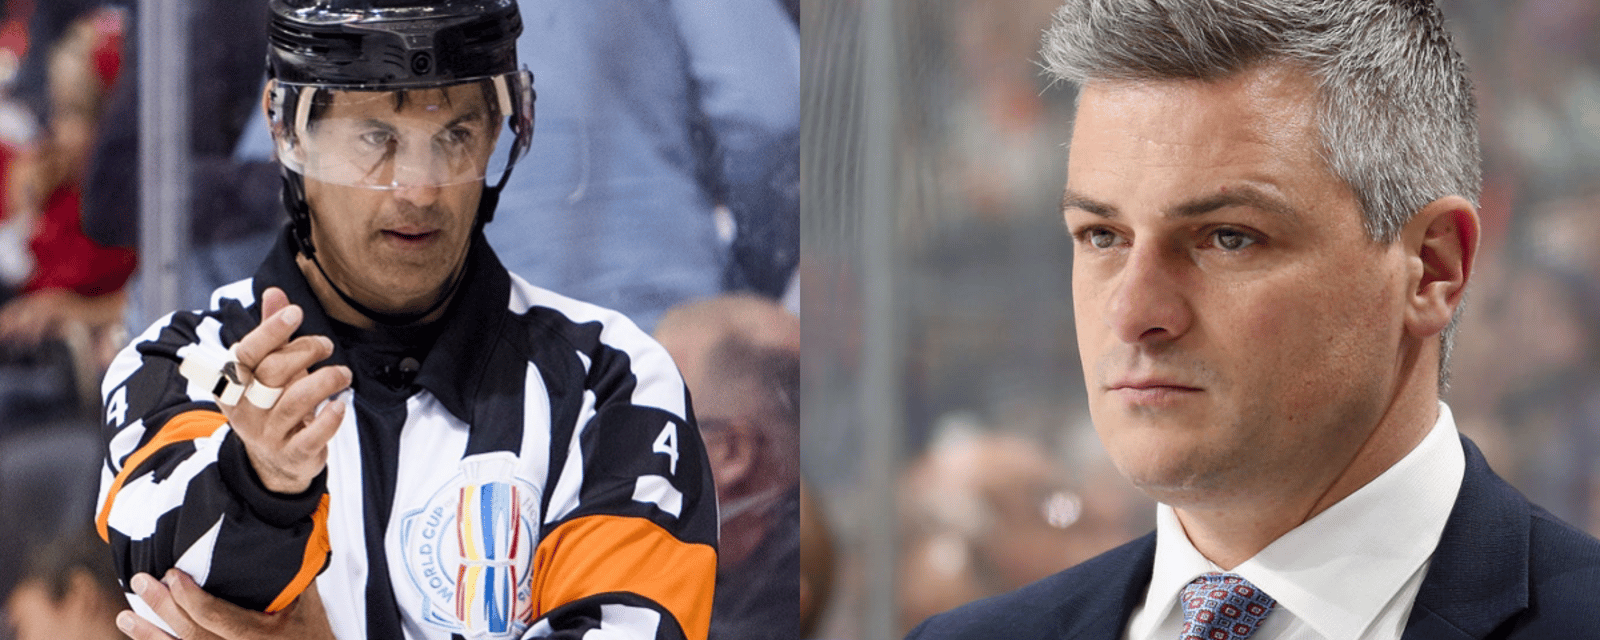 Sheldon Keefe addresses the Wes McCauley controversy.